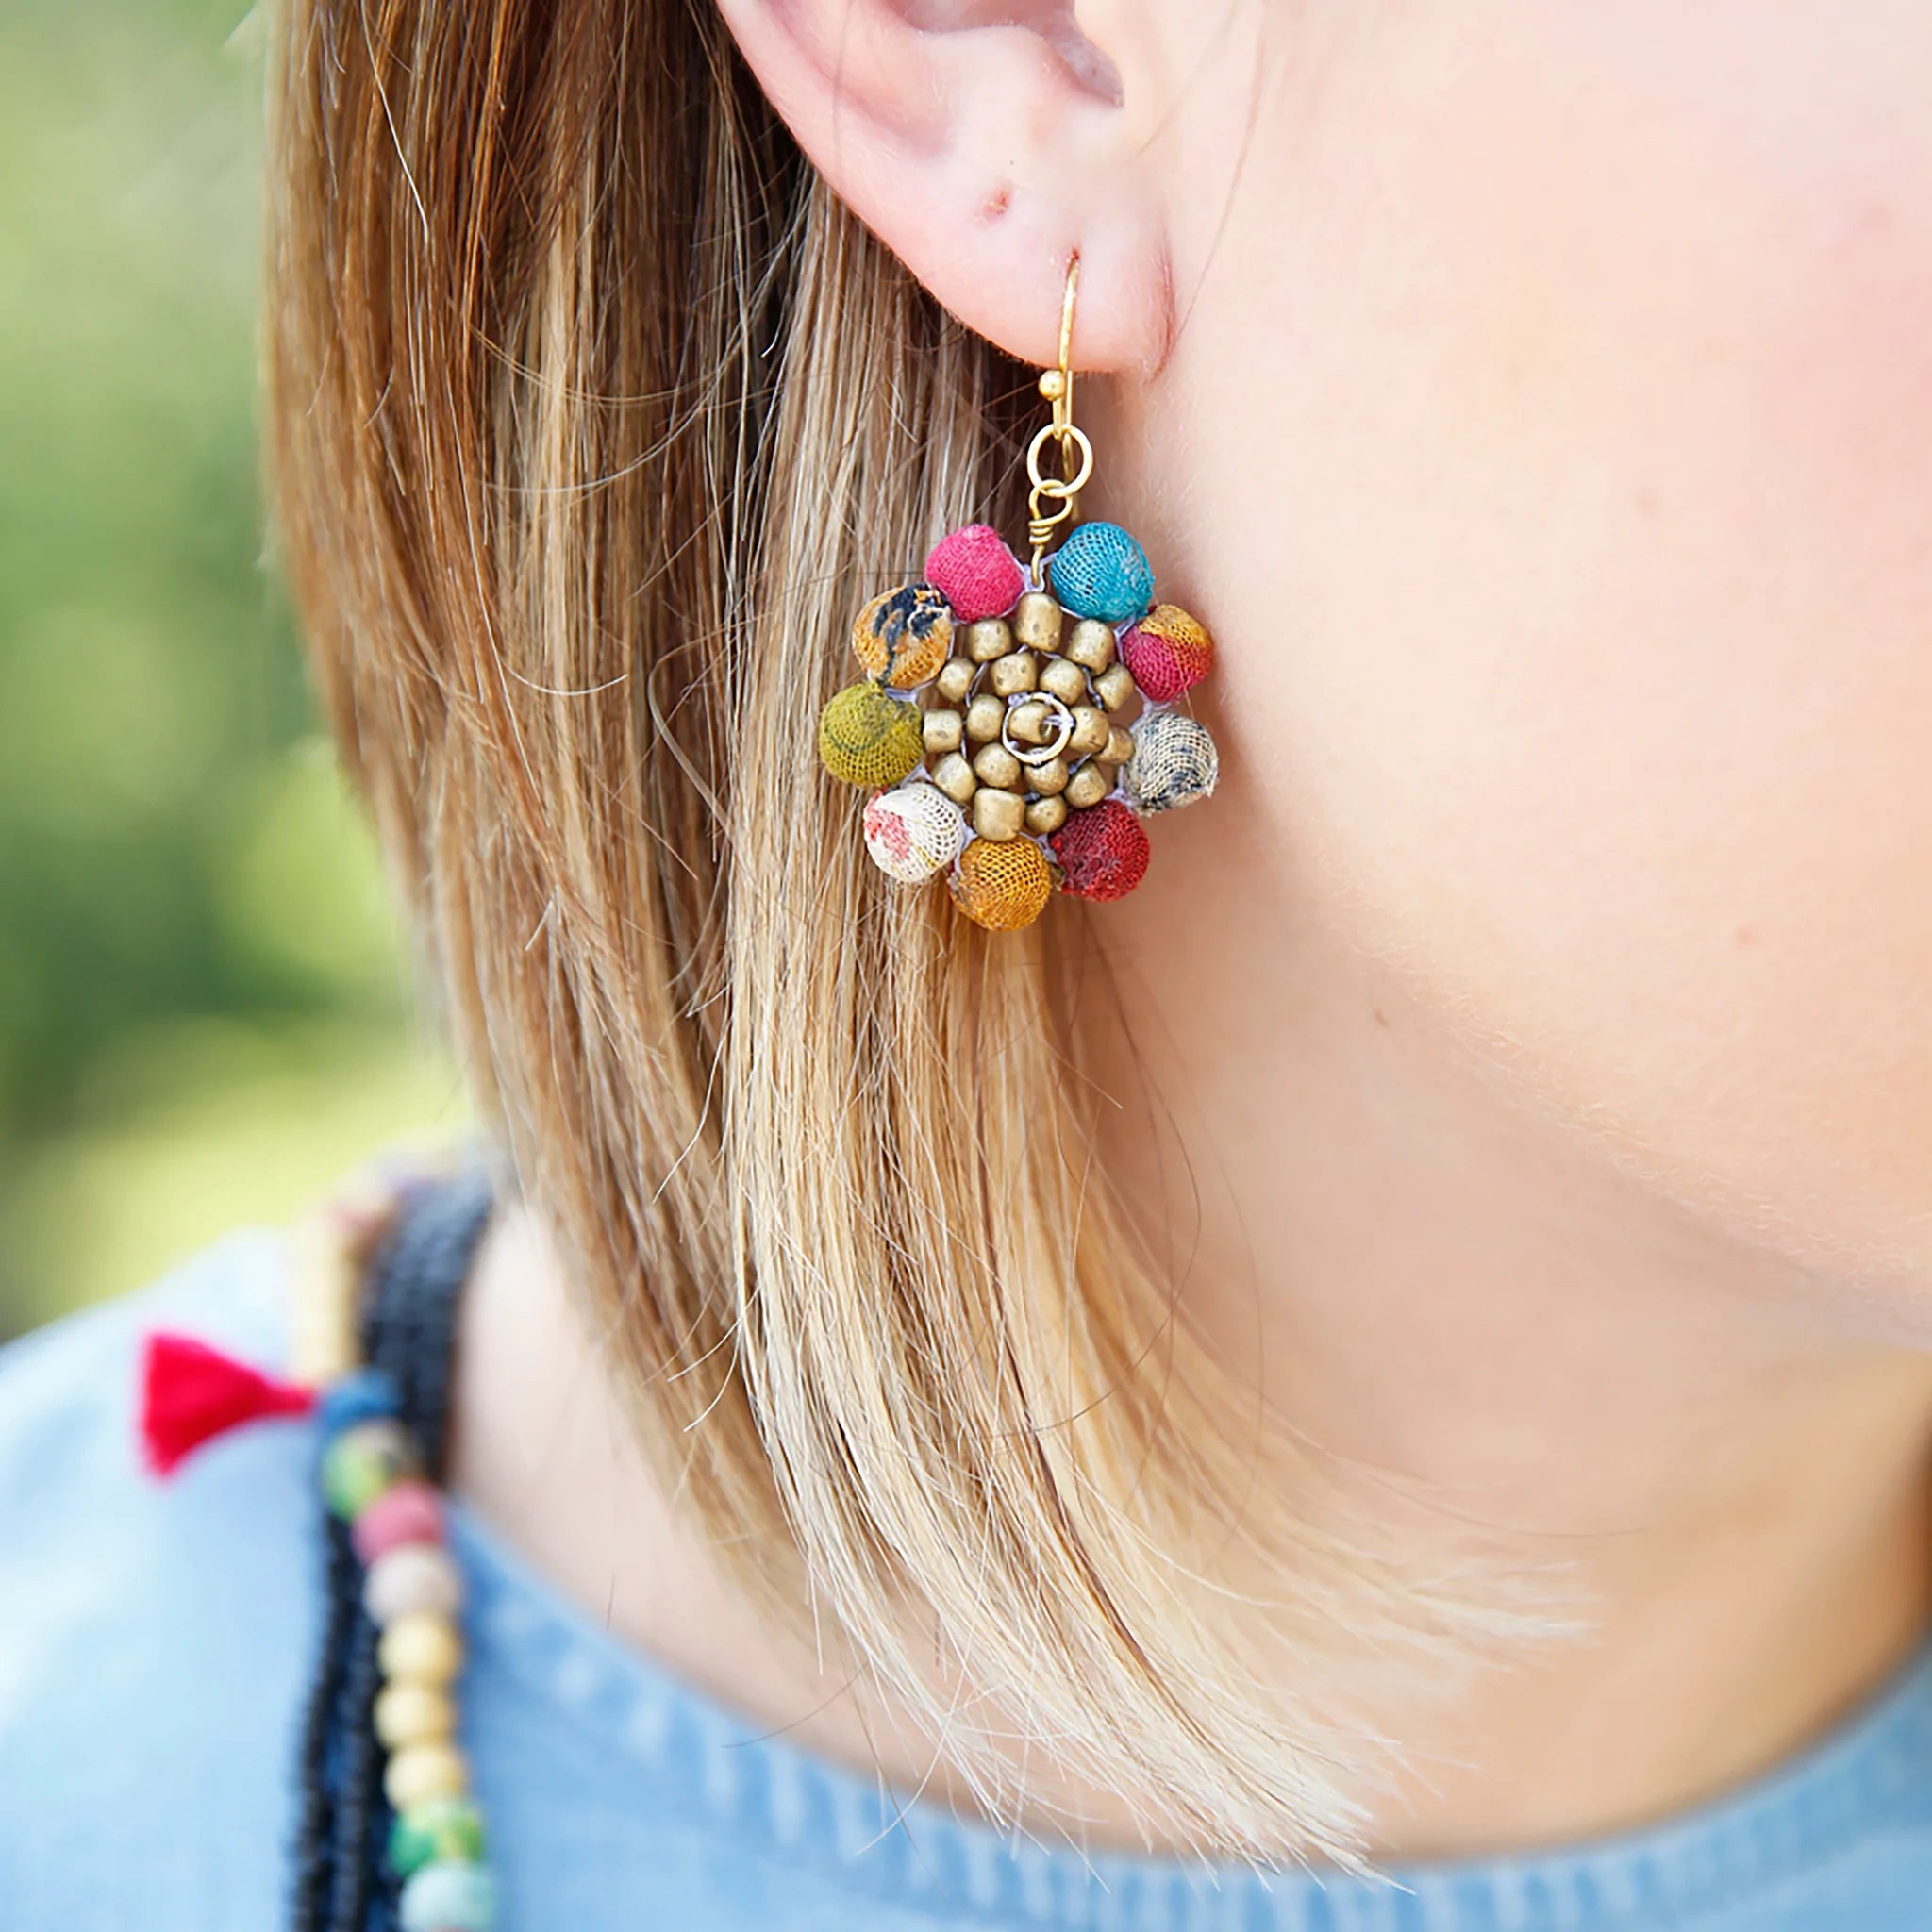 Angelco Accessories Sunny flower kantha earrings - close up worn on ear